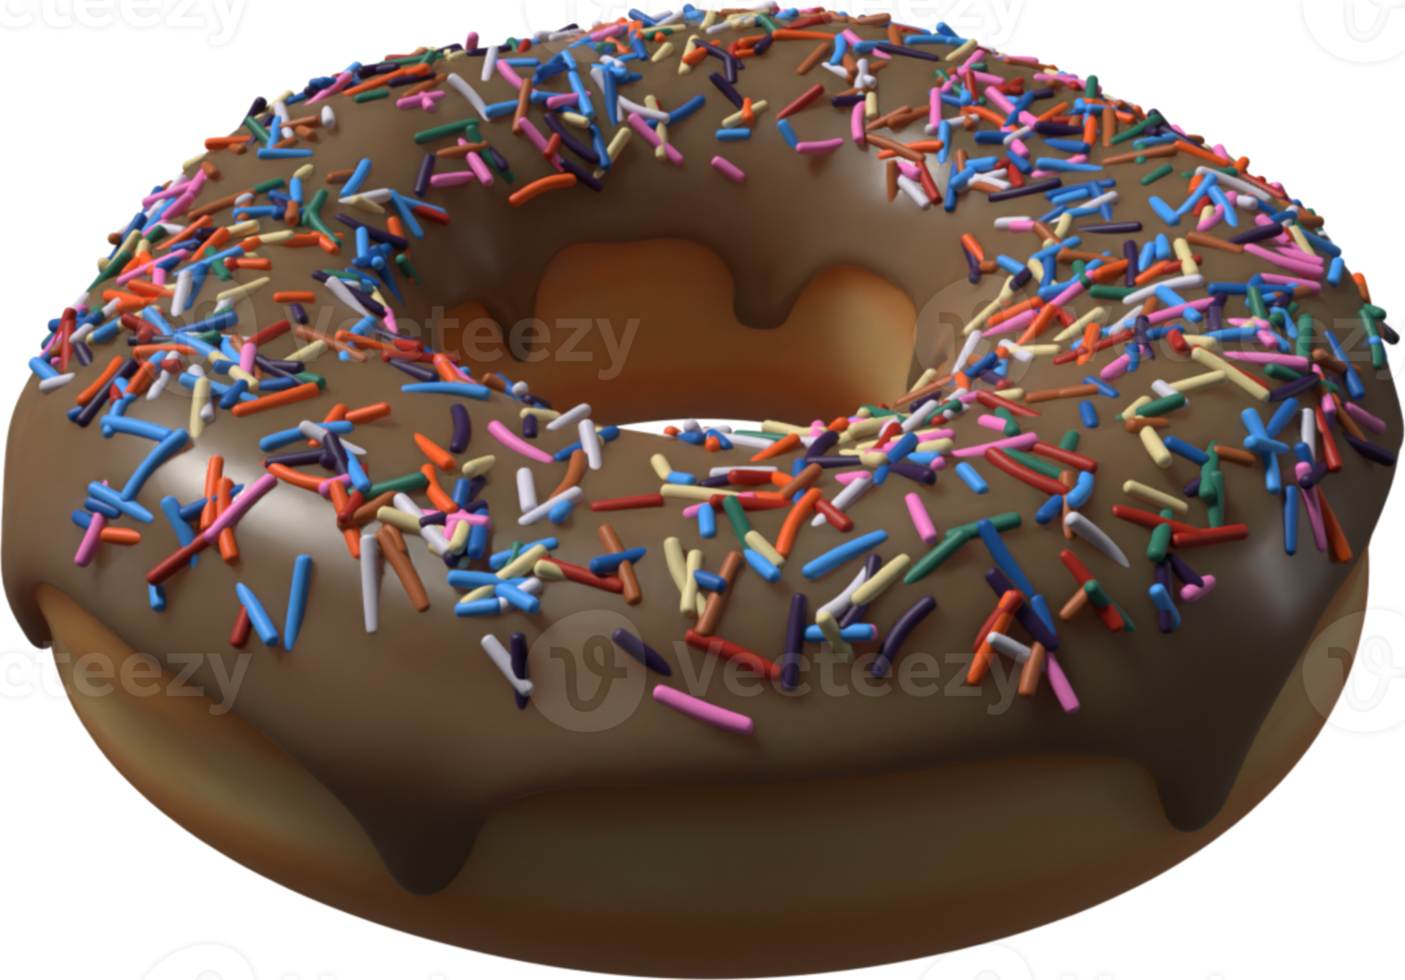 Chocolate Donut with Sprinkles 3D Illustration png